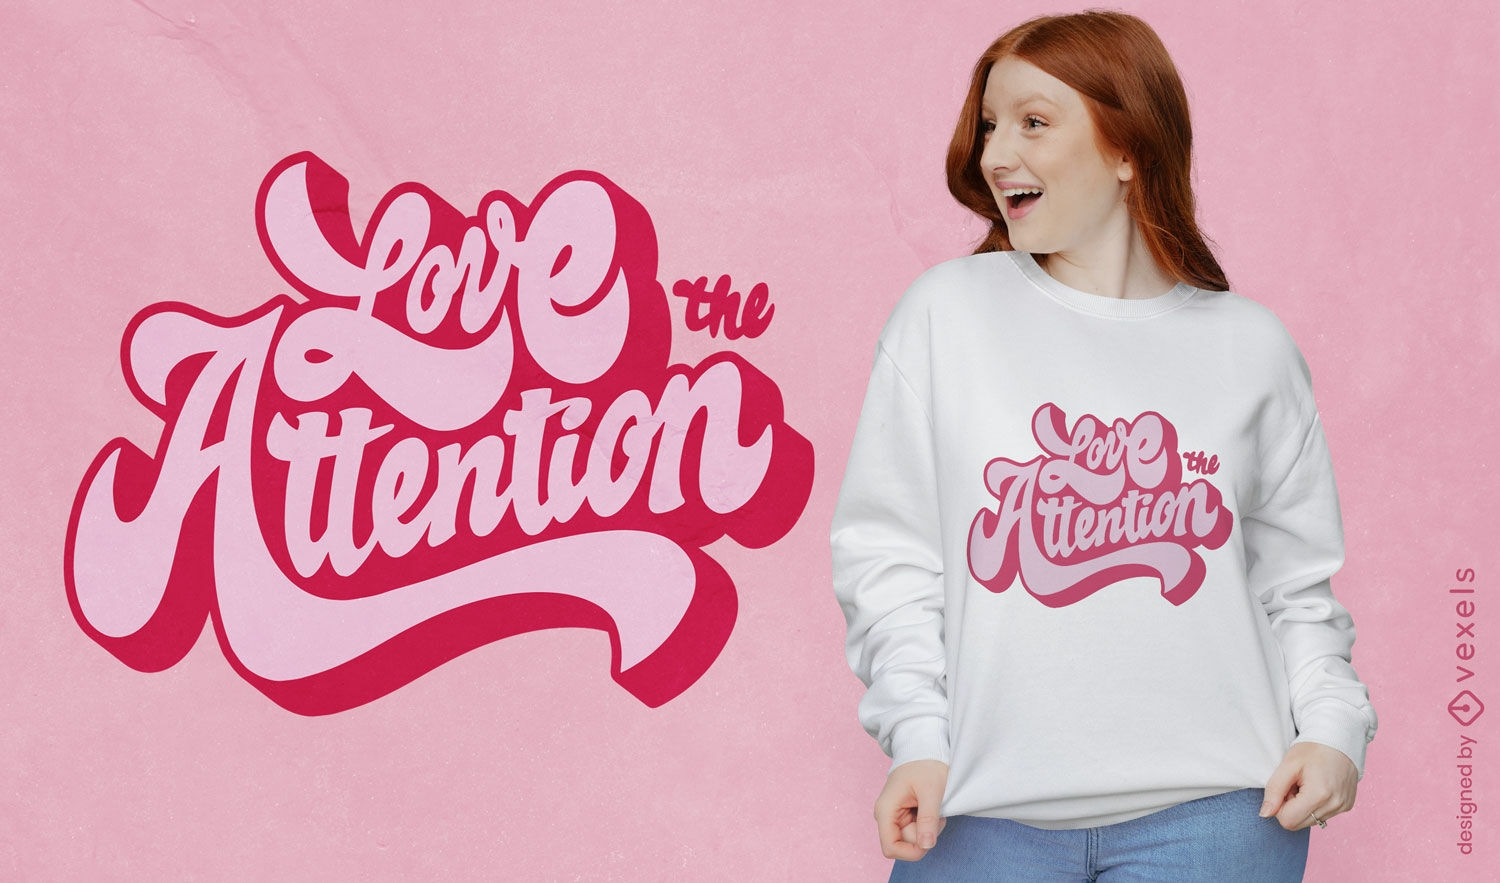 Love the attention quote t-shirt design